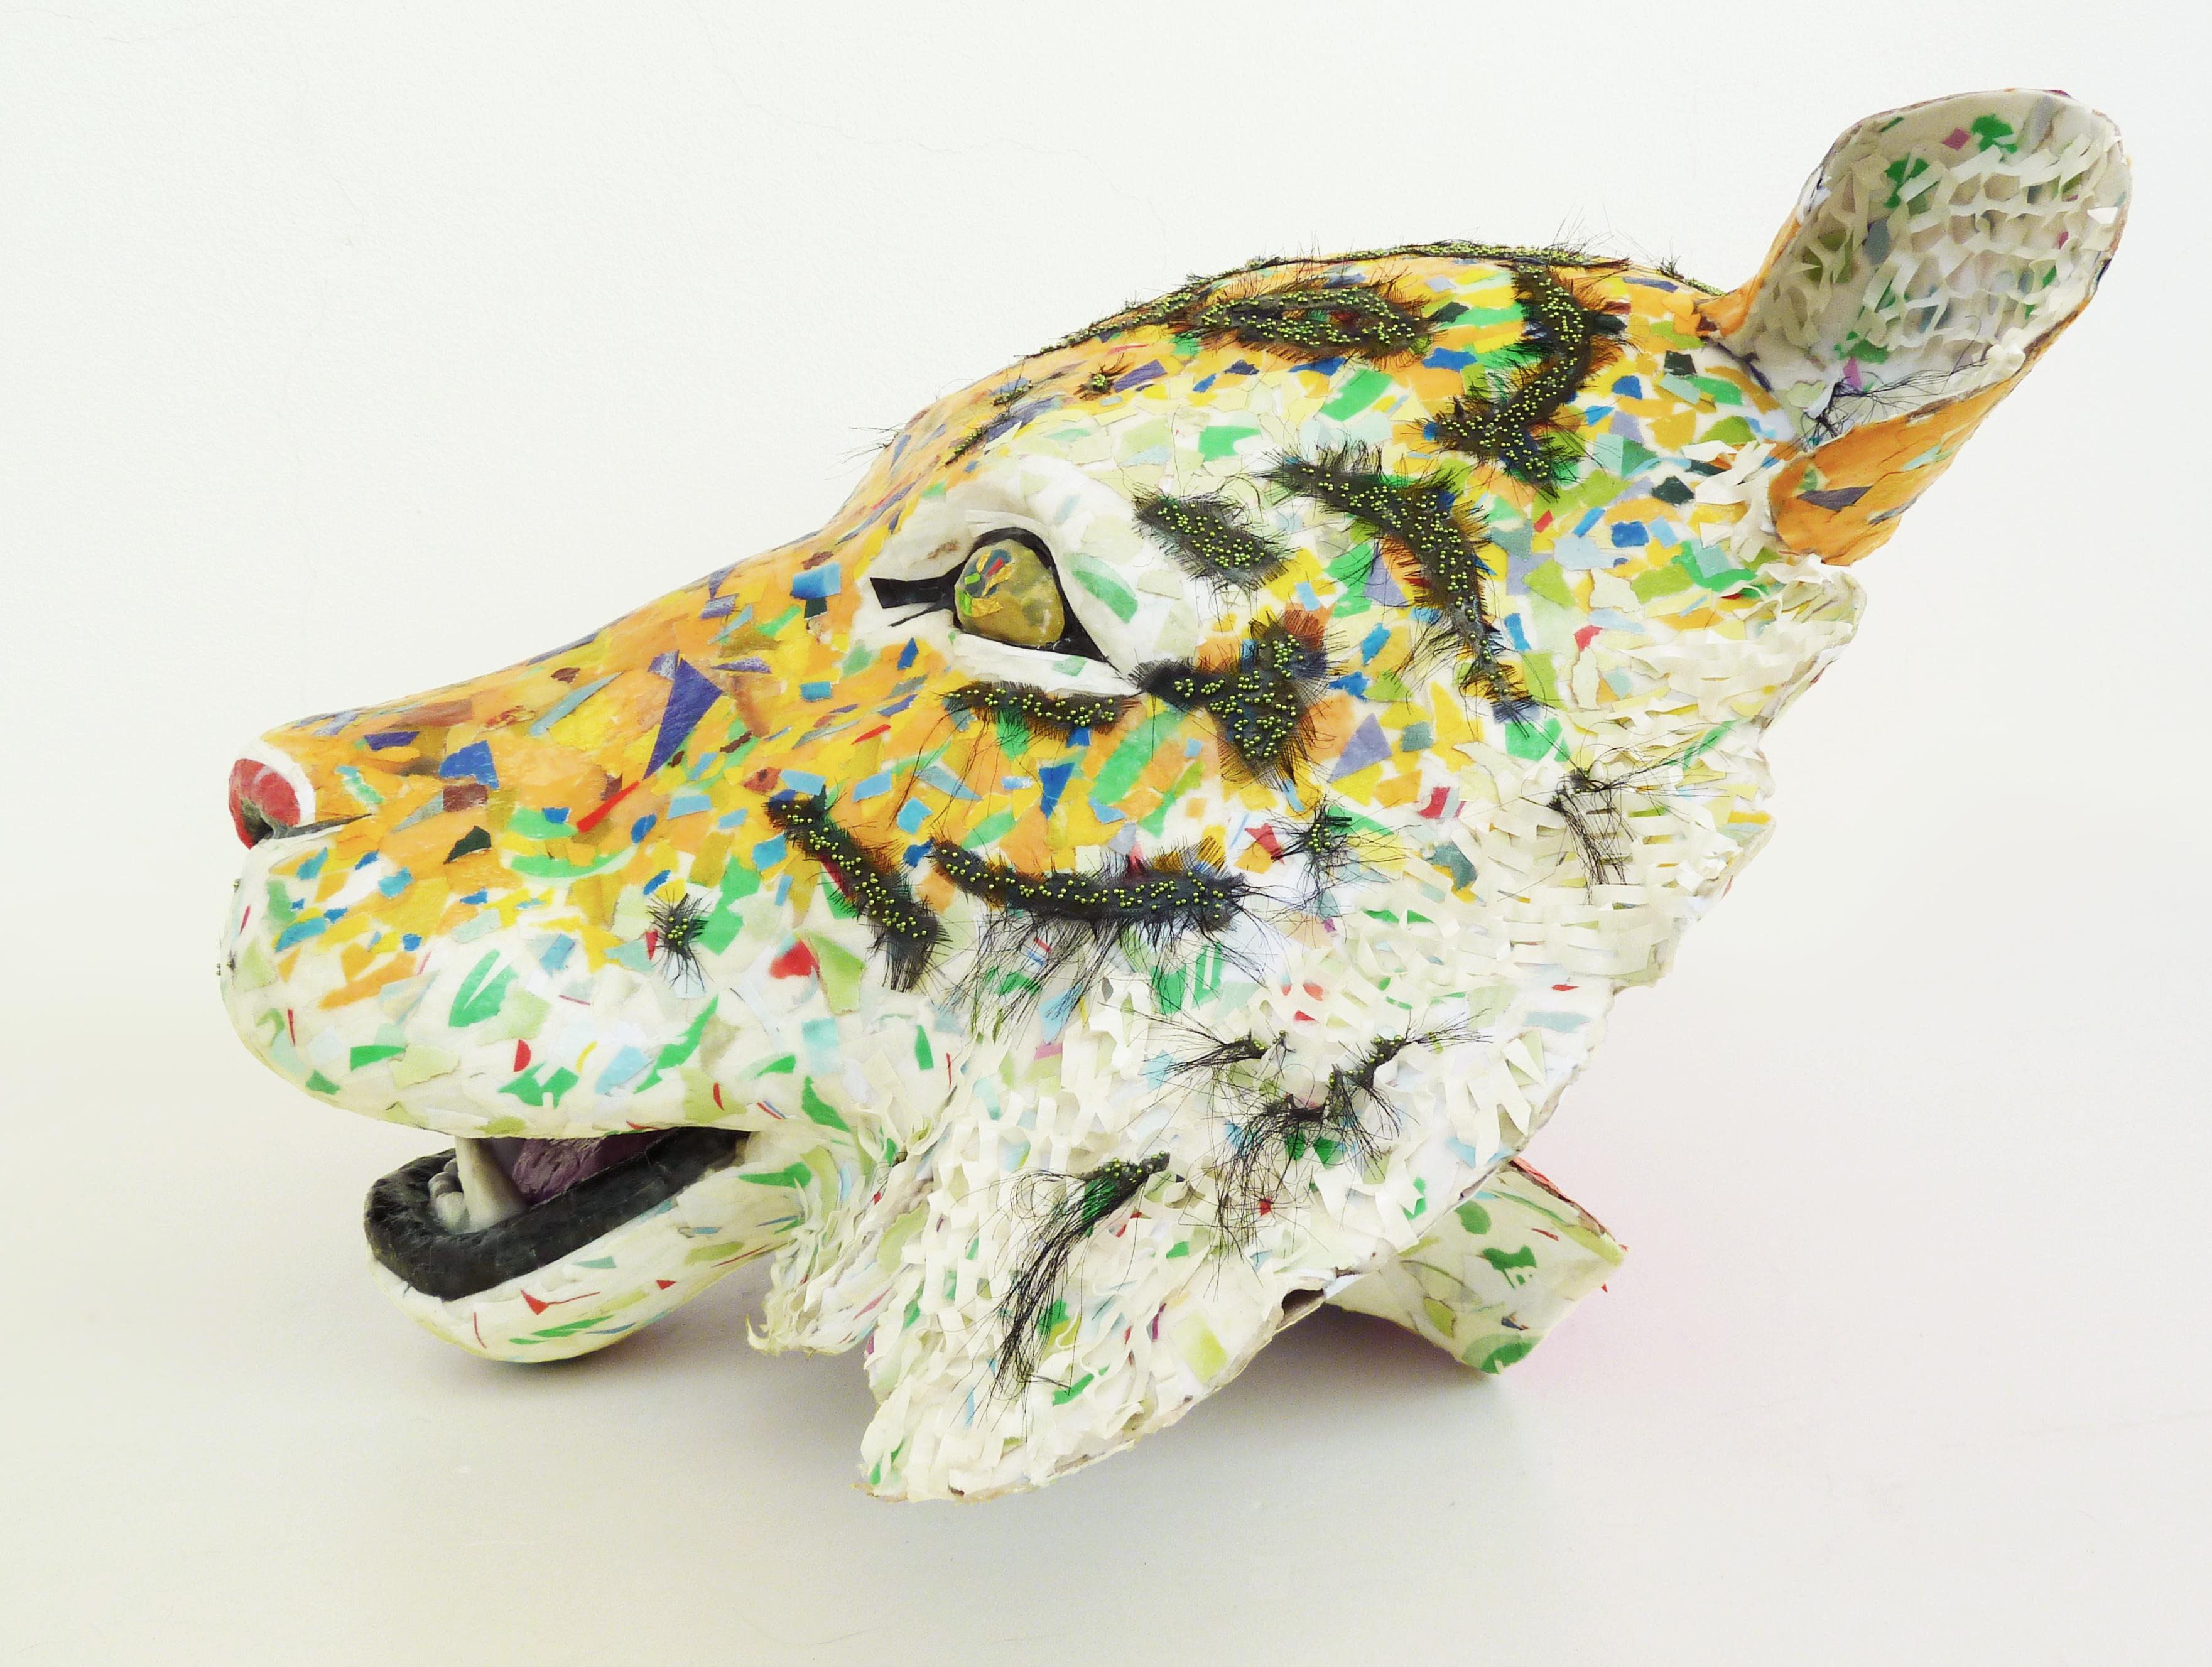 Amur- Sculpture of Endangered Siberian Tiger Created from Up-Cycled Materials - Contemporary Mixed Media Art by Yulia Shtern